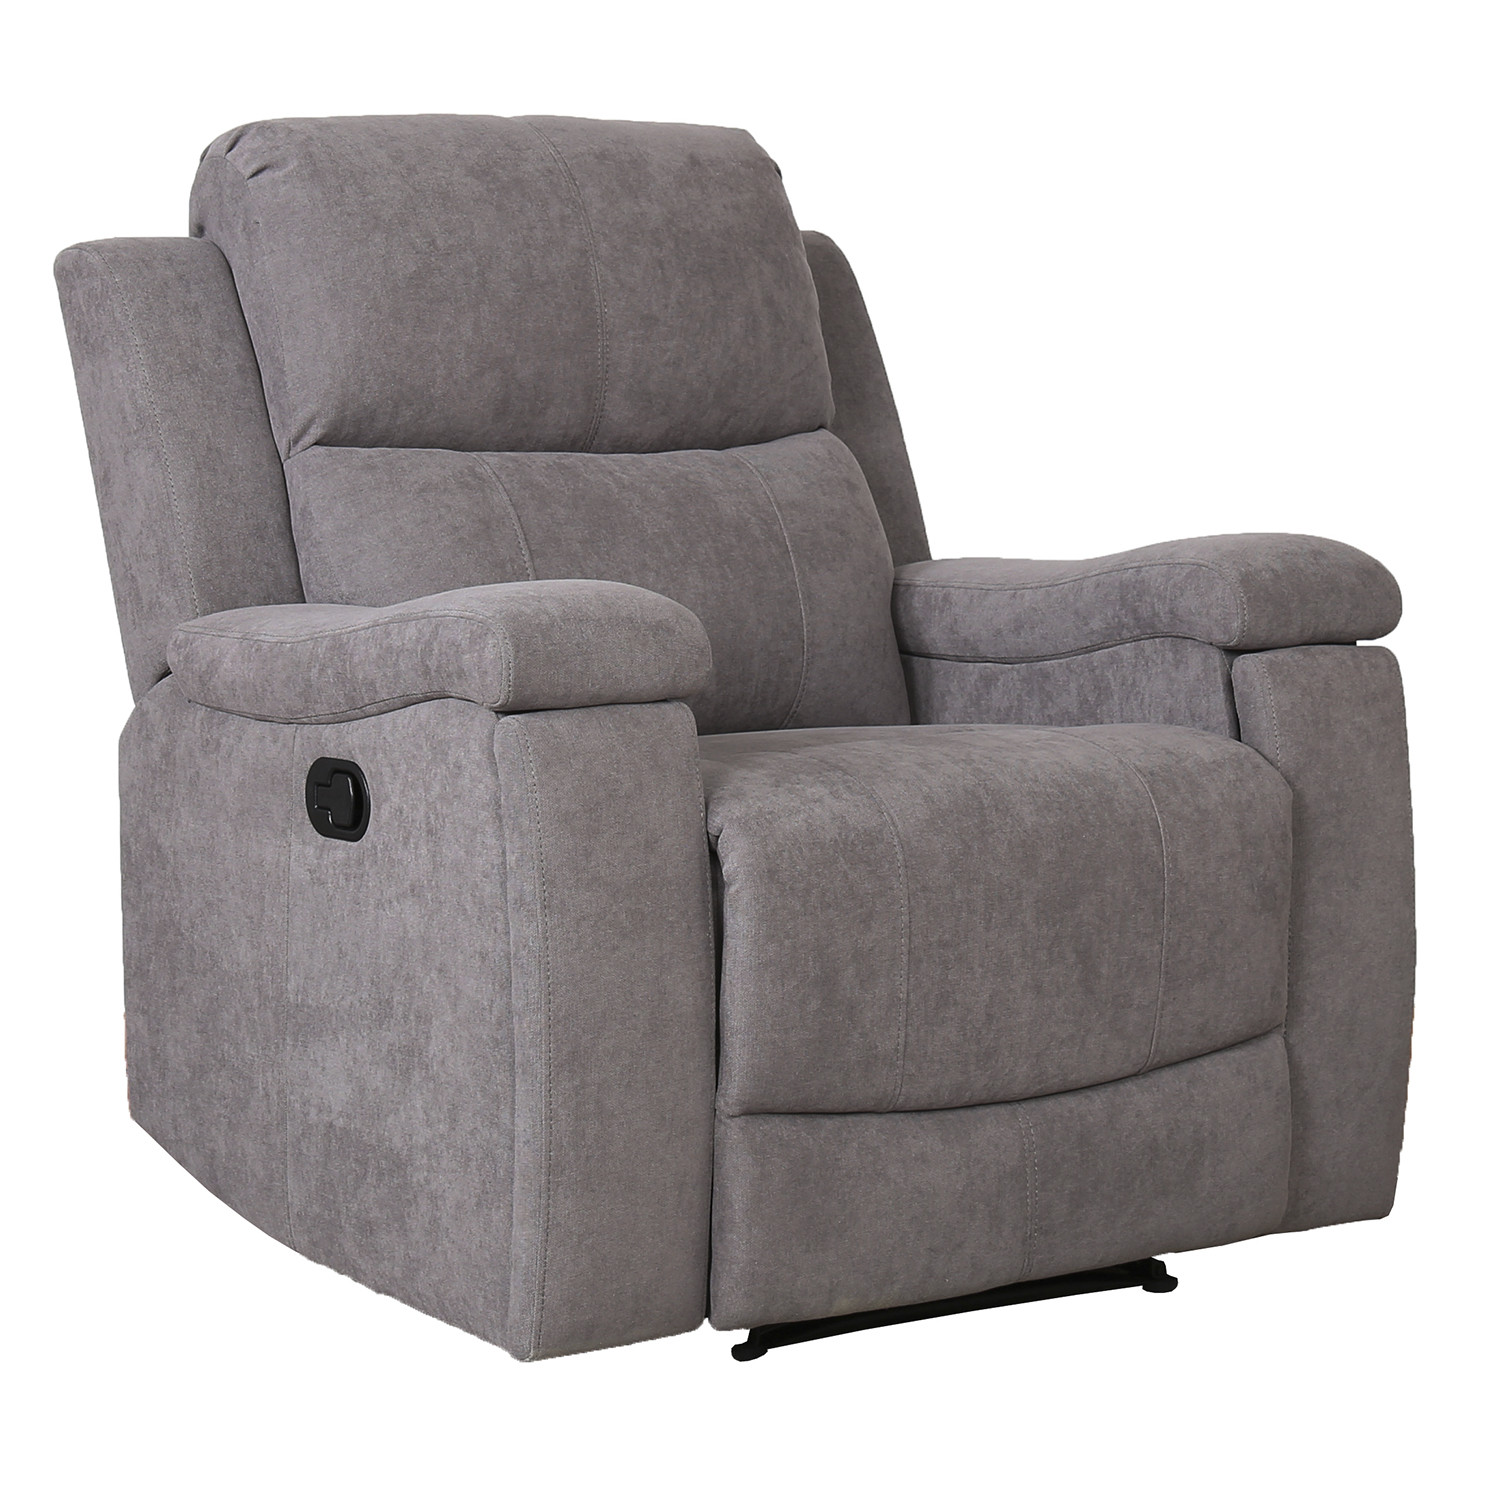 Ledbury Grey Fabric Manual Recliner Chair with Footrest Image 2